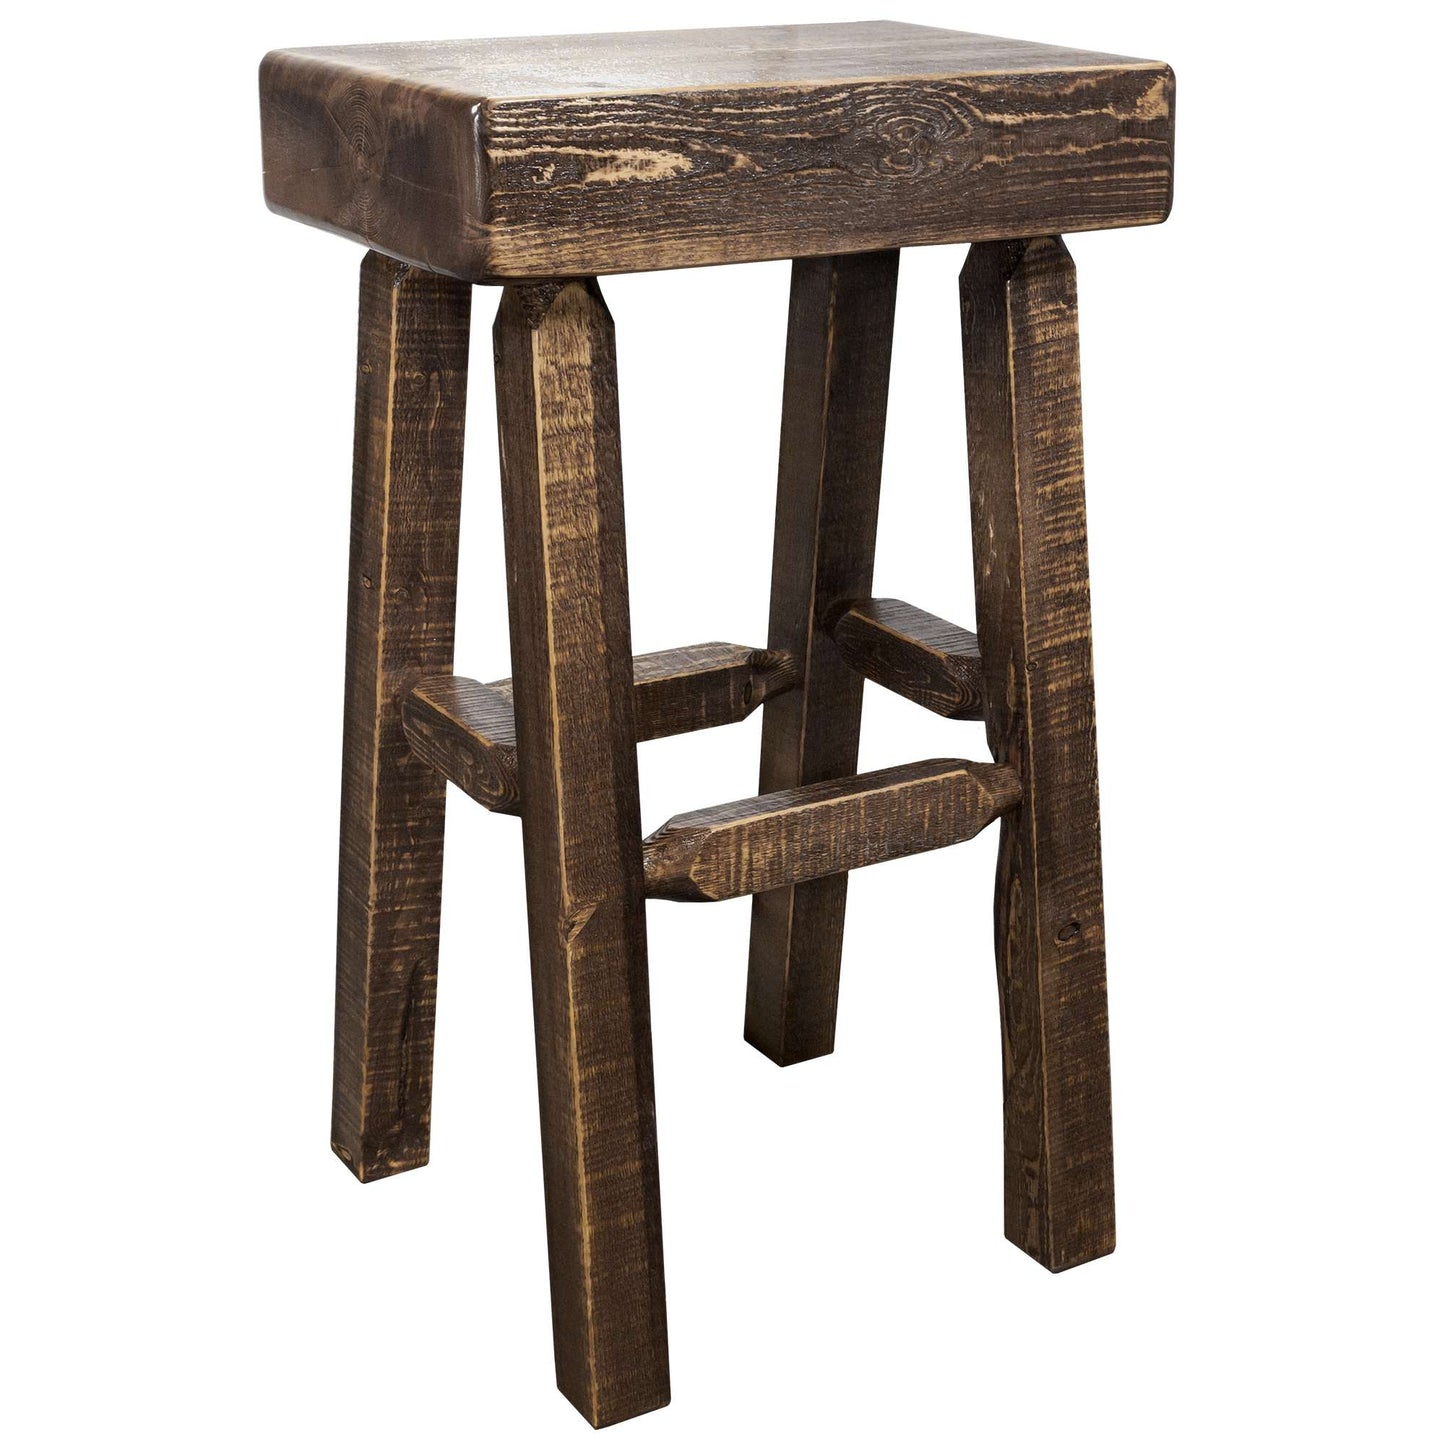 Montana Woodworks - Homestead Collection Half Log Barstool, Stain & Clear Lacquer Finish - 30 in